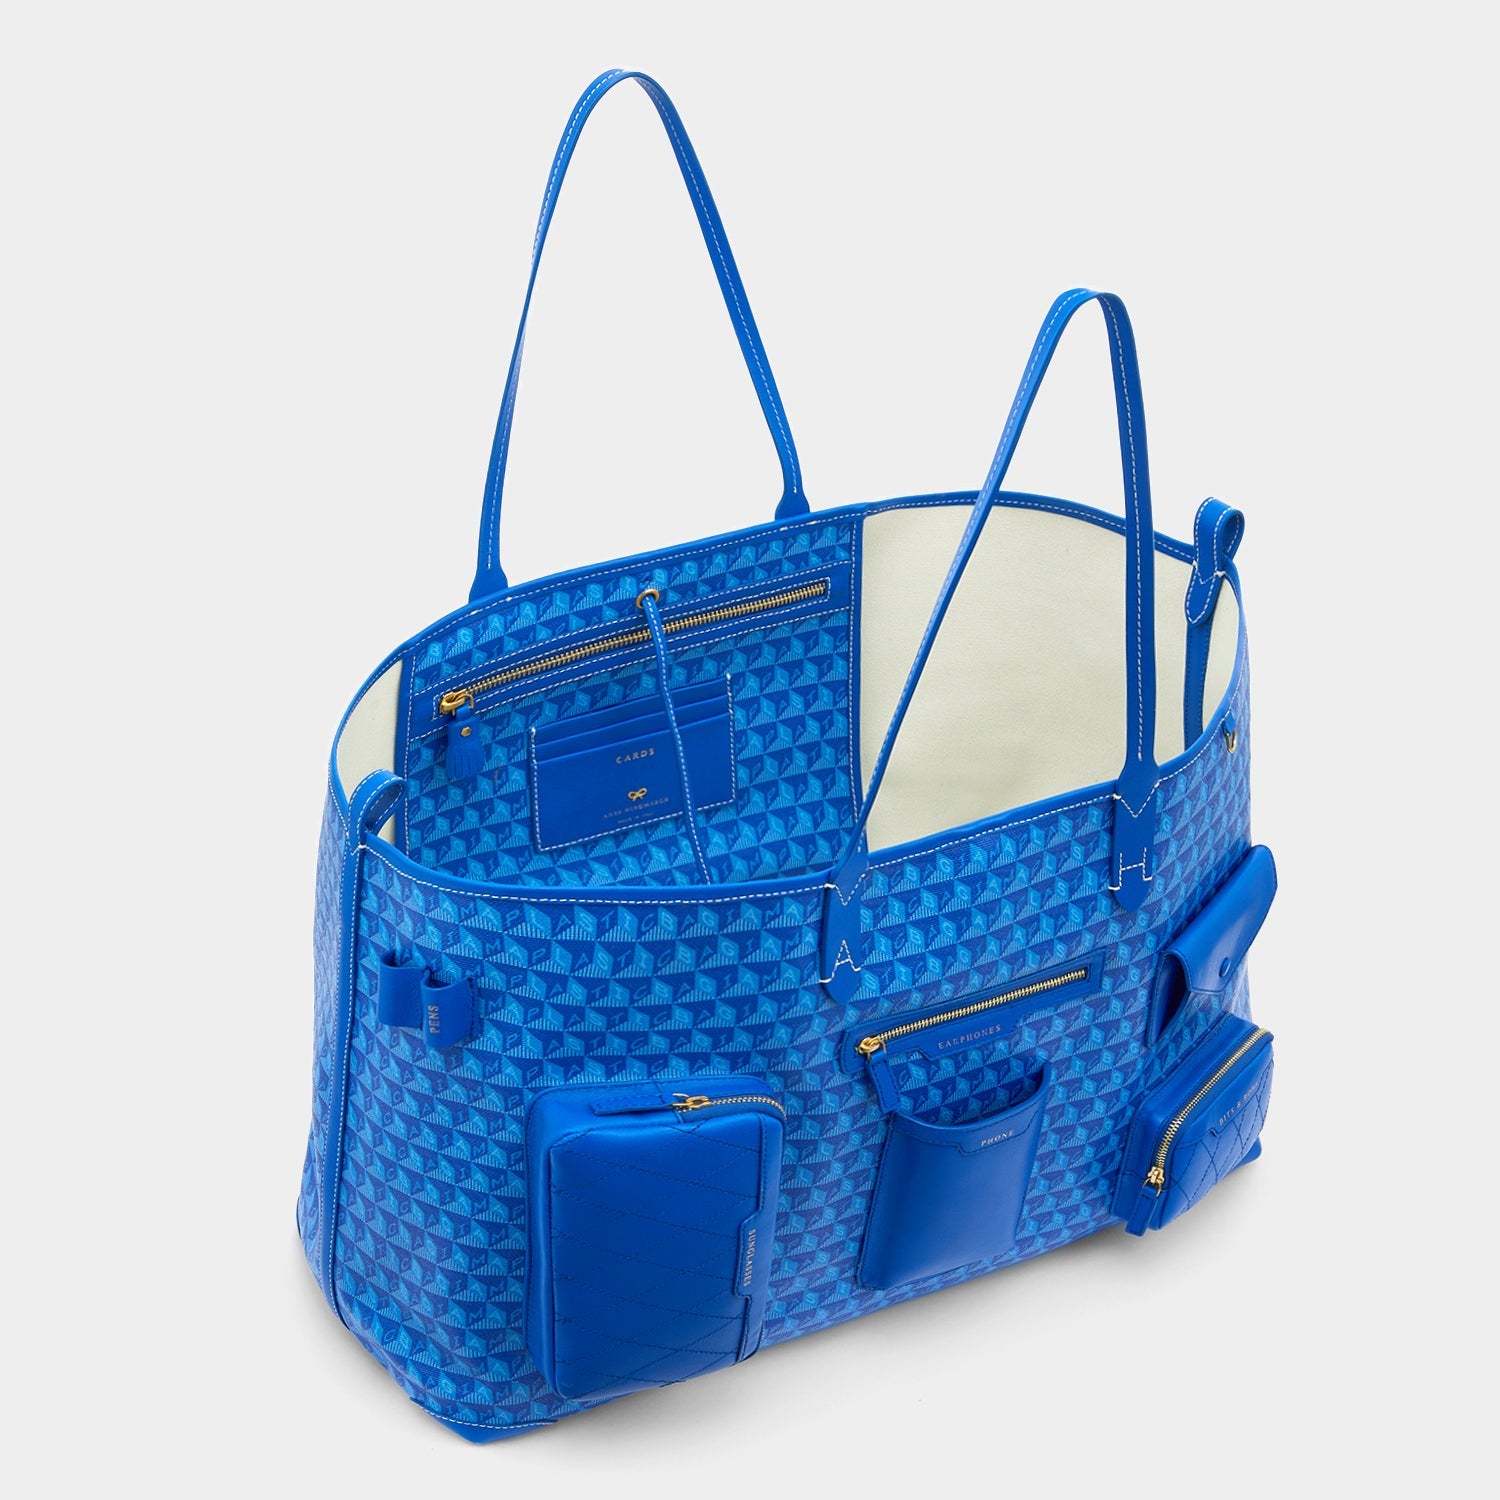 I am a Plastic Bag XL Multi Pocket Tote -

                  
                    Recycled Canvas in Electric Blue -
                  

                  Anya Hindmarch EU
